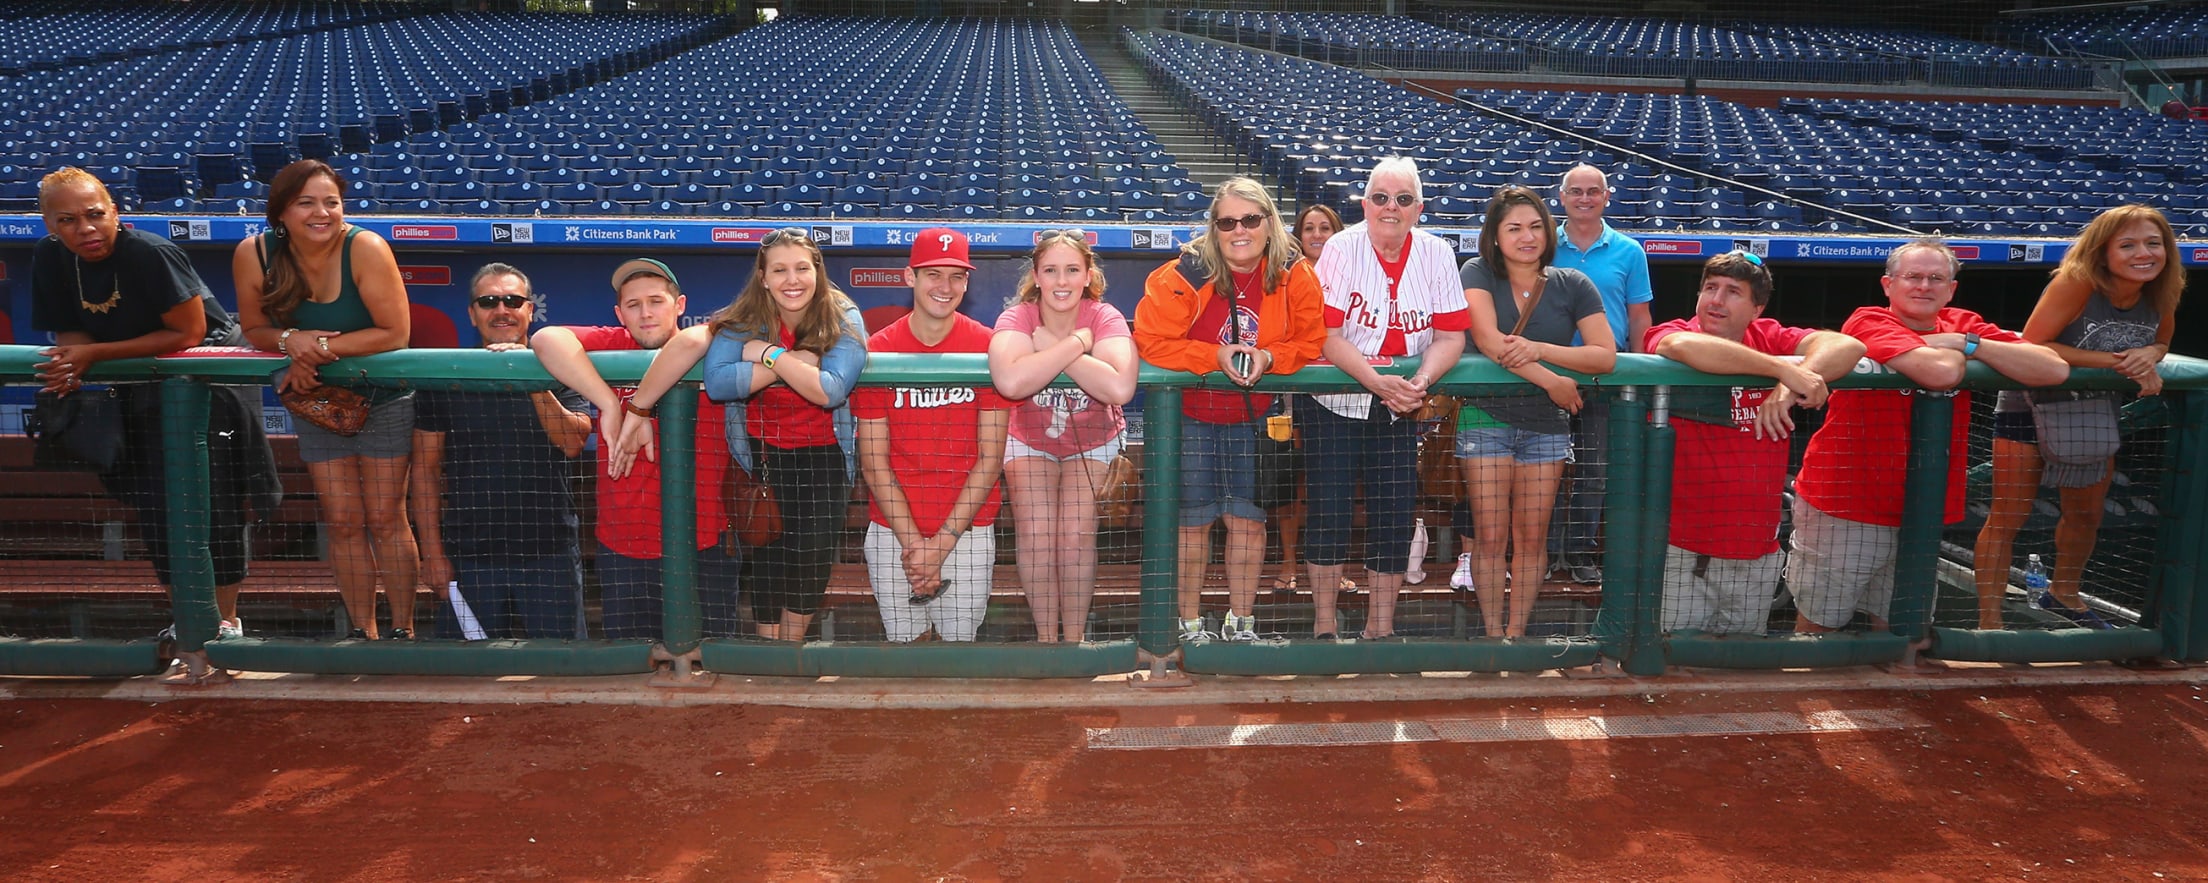 Philadelphia Phillies' home Citizens Bank Park latest stop on Drive There  tour 